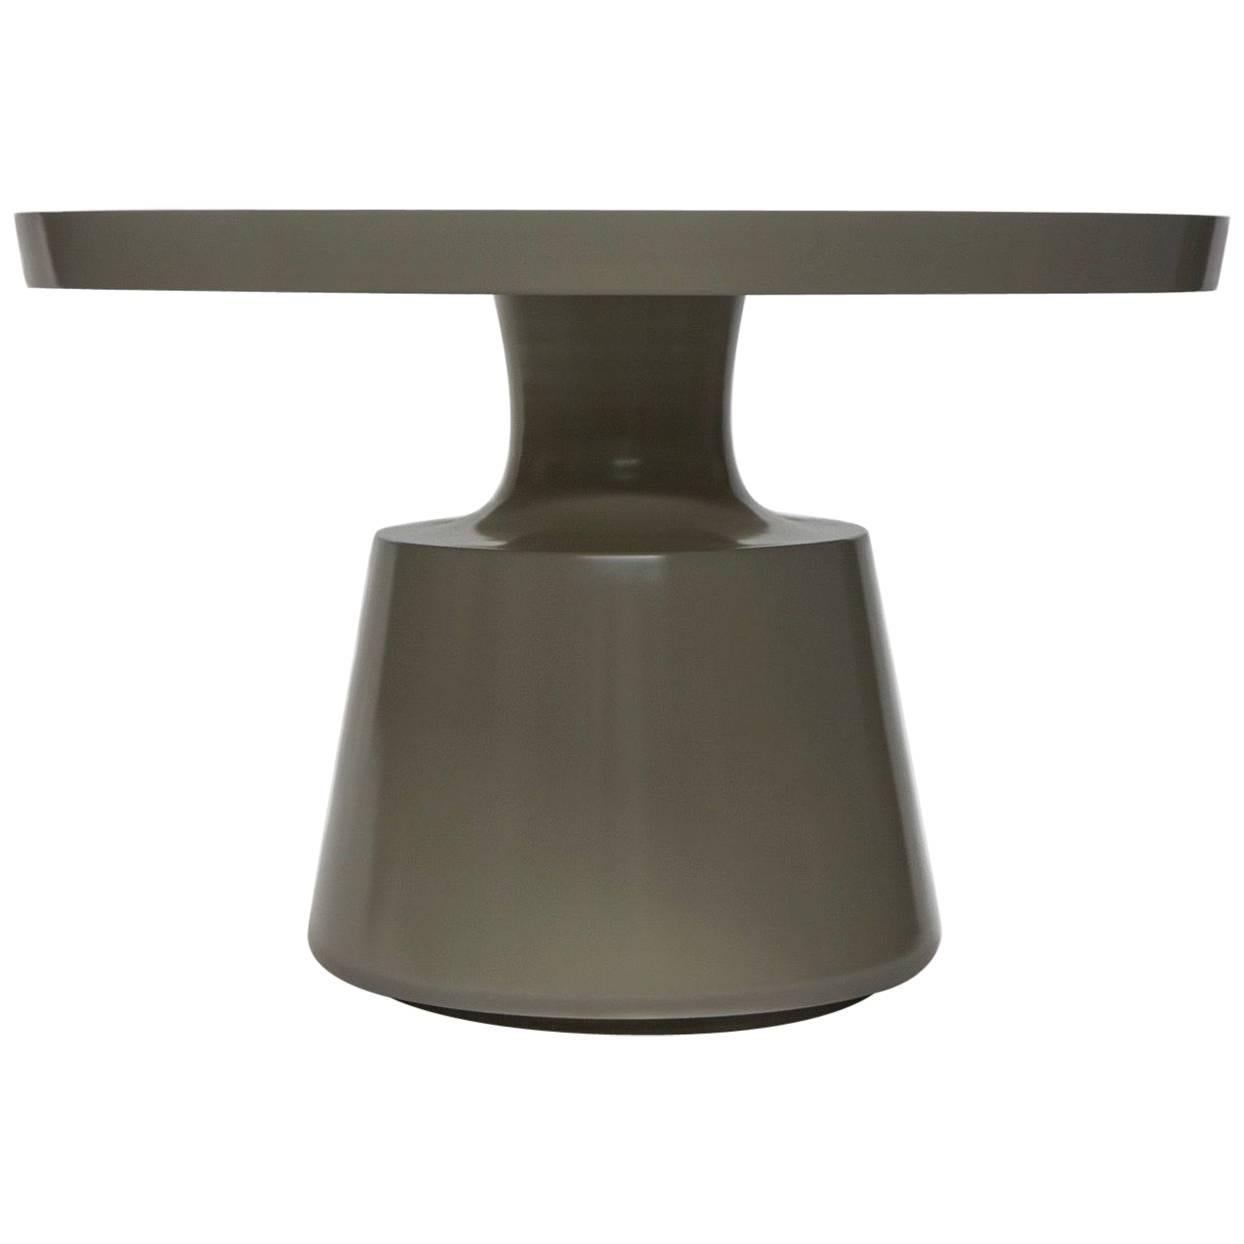 Beautiful Onda Entry Table with a Sculptural Pedestal and Lacquered Finish For Sale